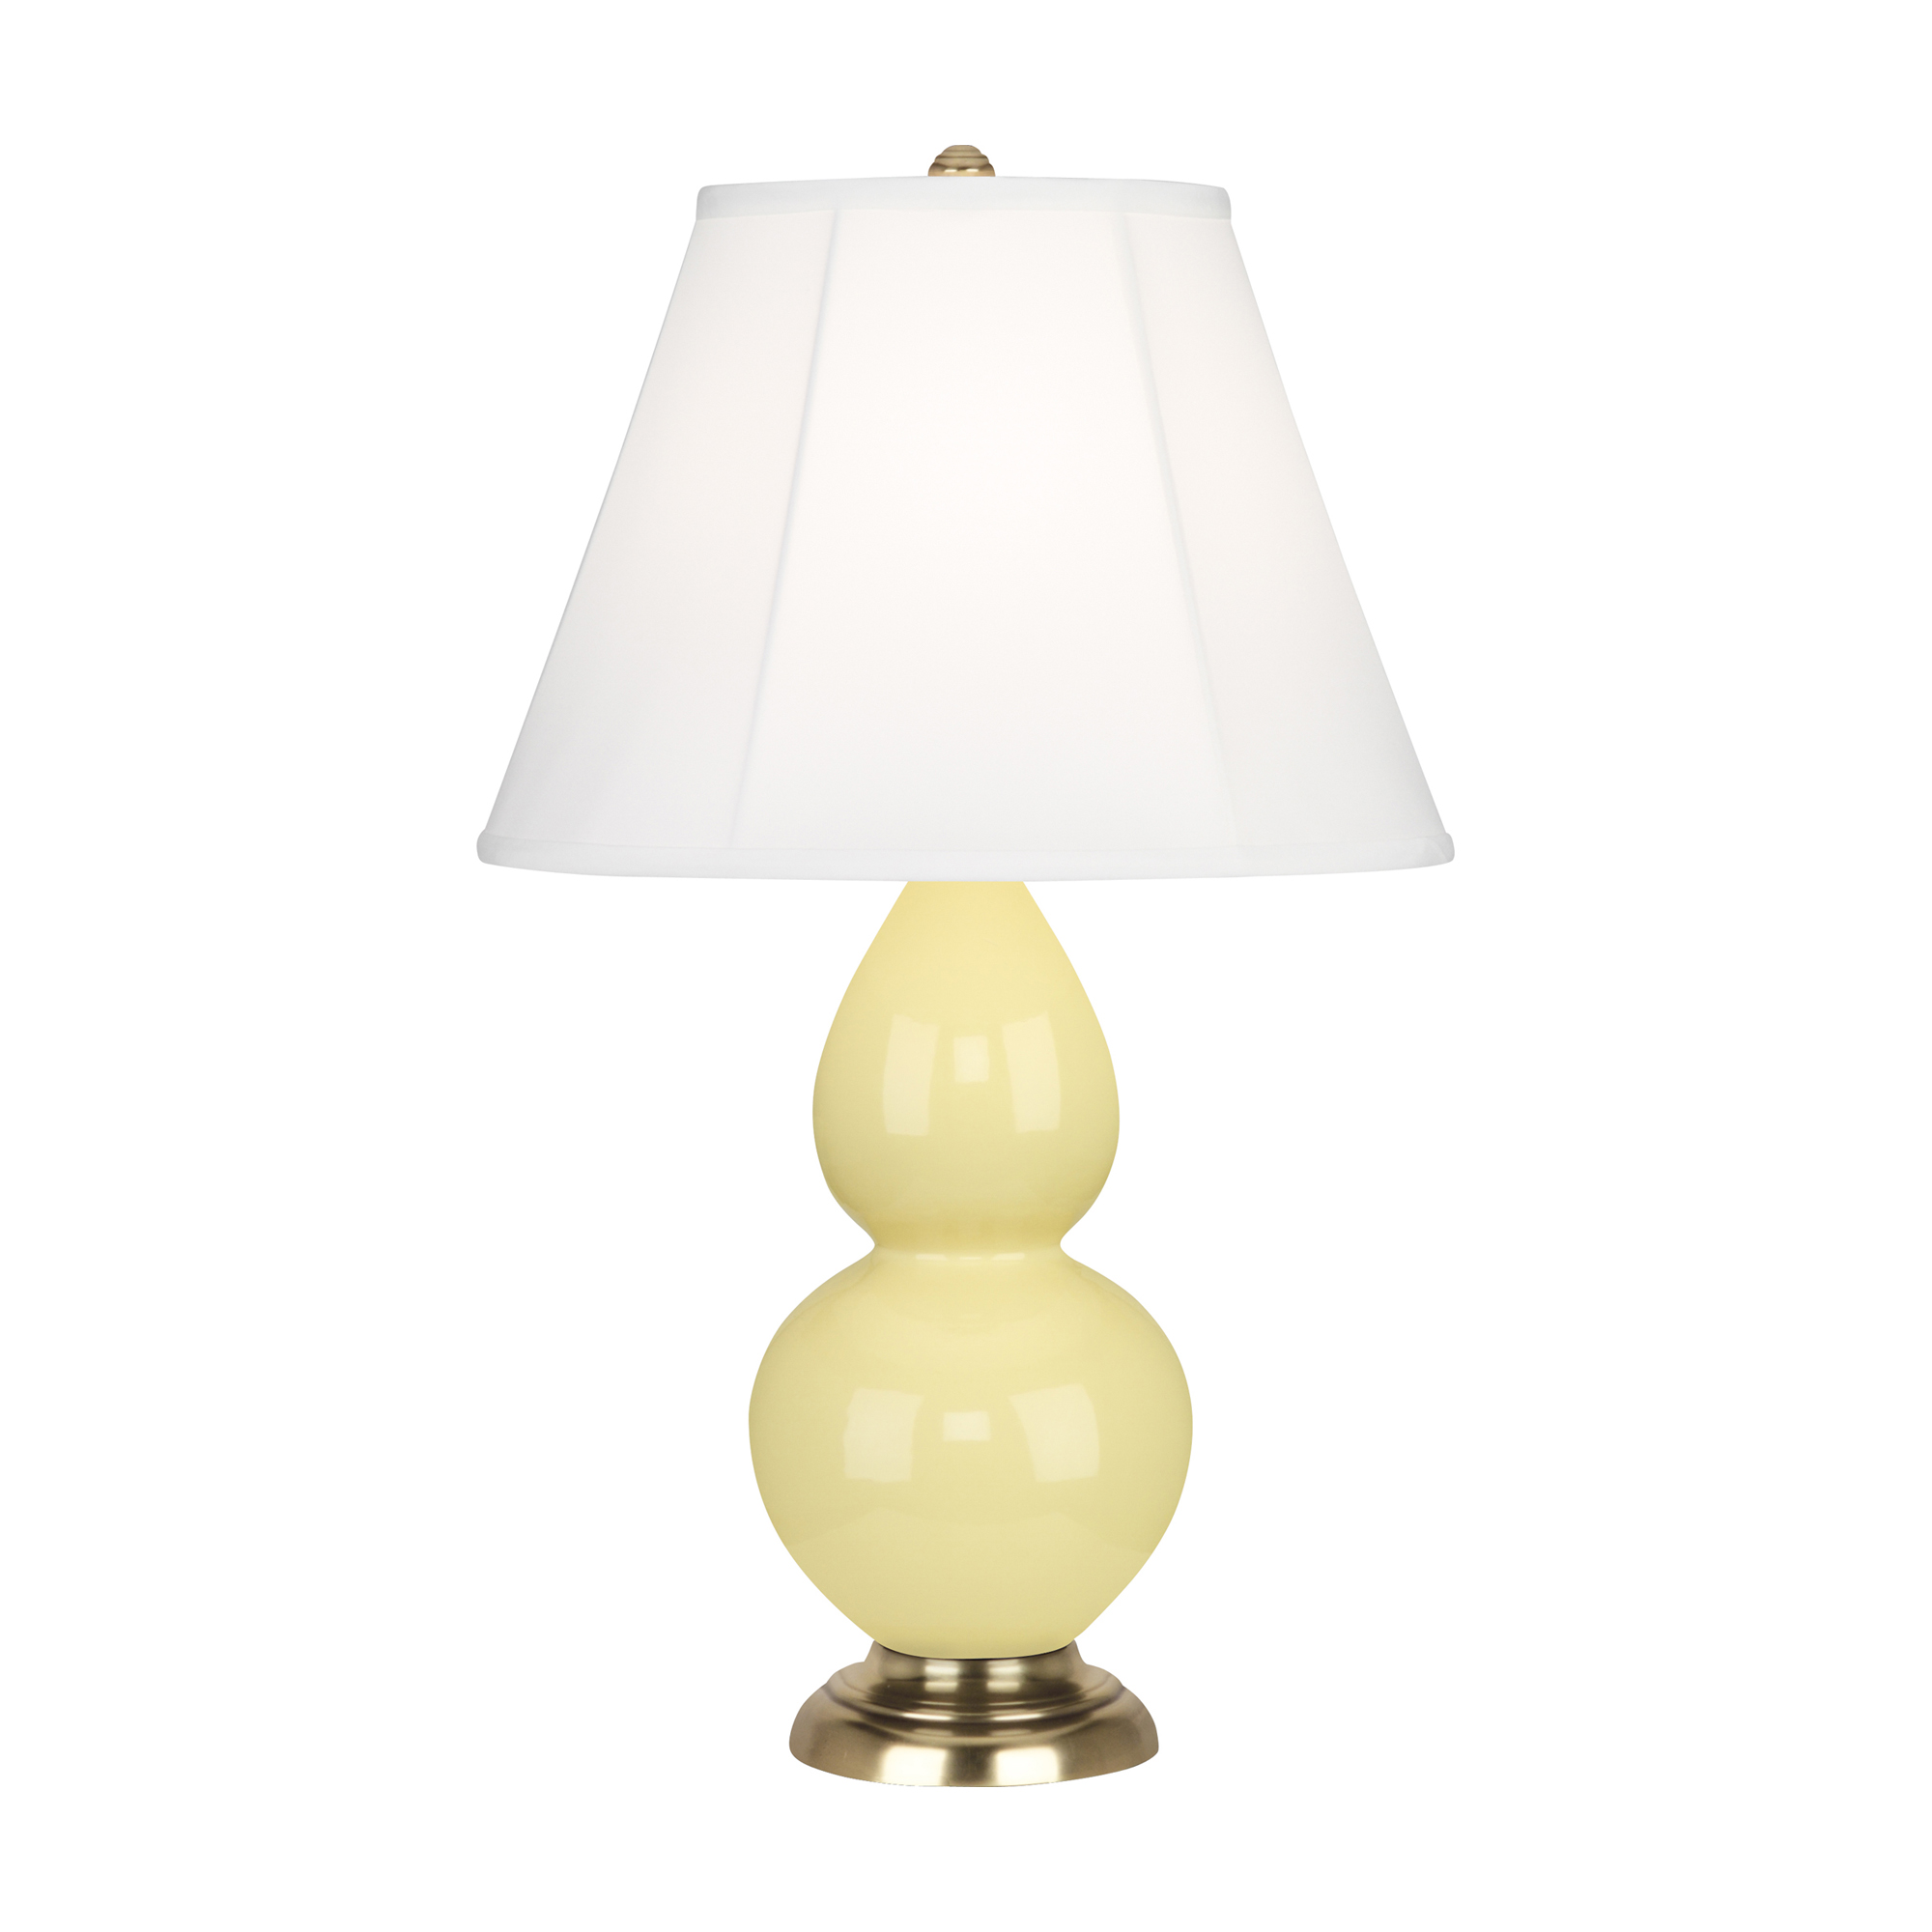 Small Double Gourd Accent Lamp Style #1614